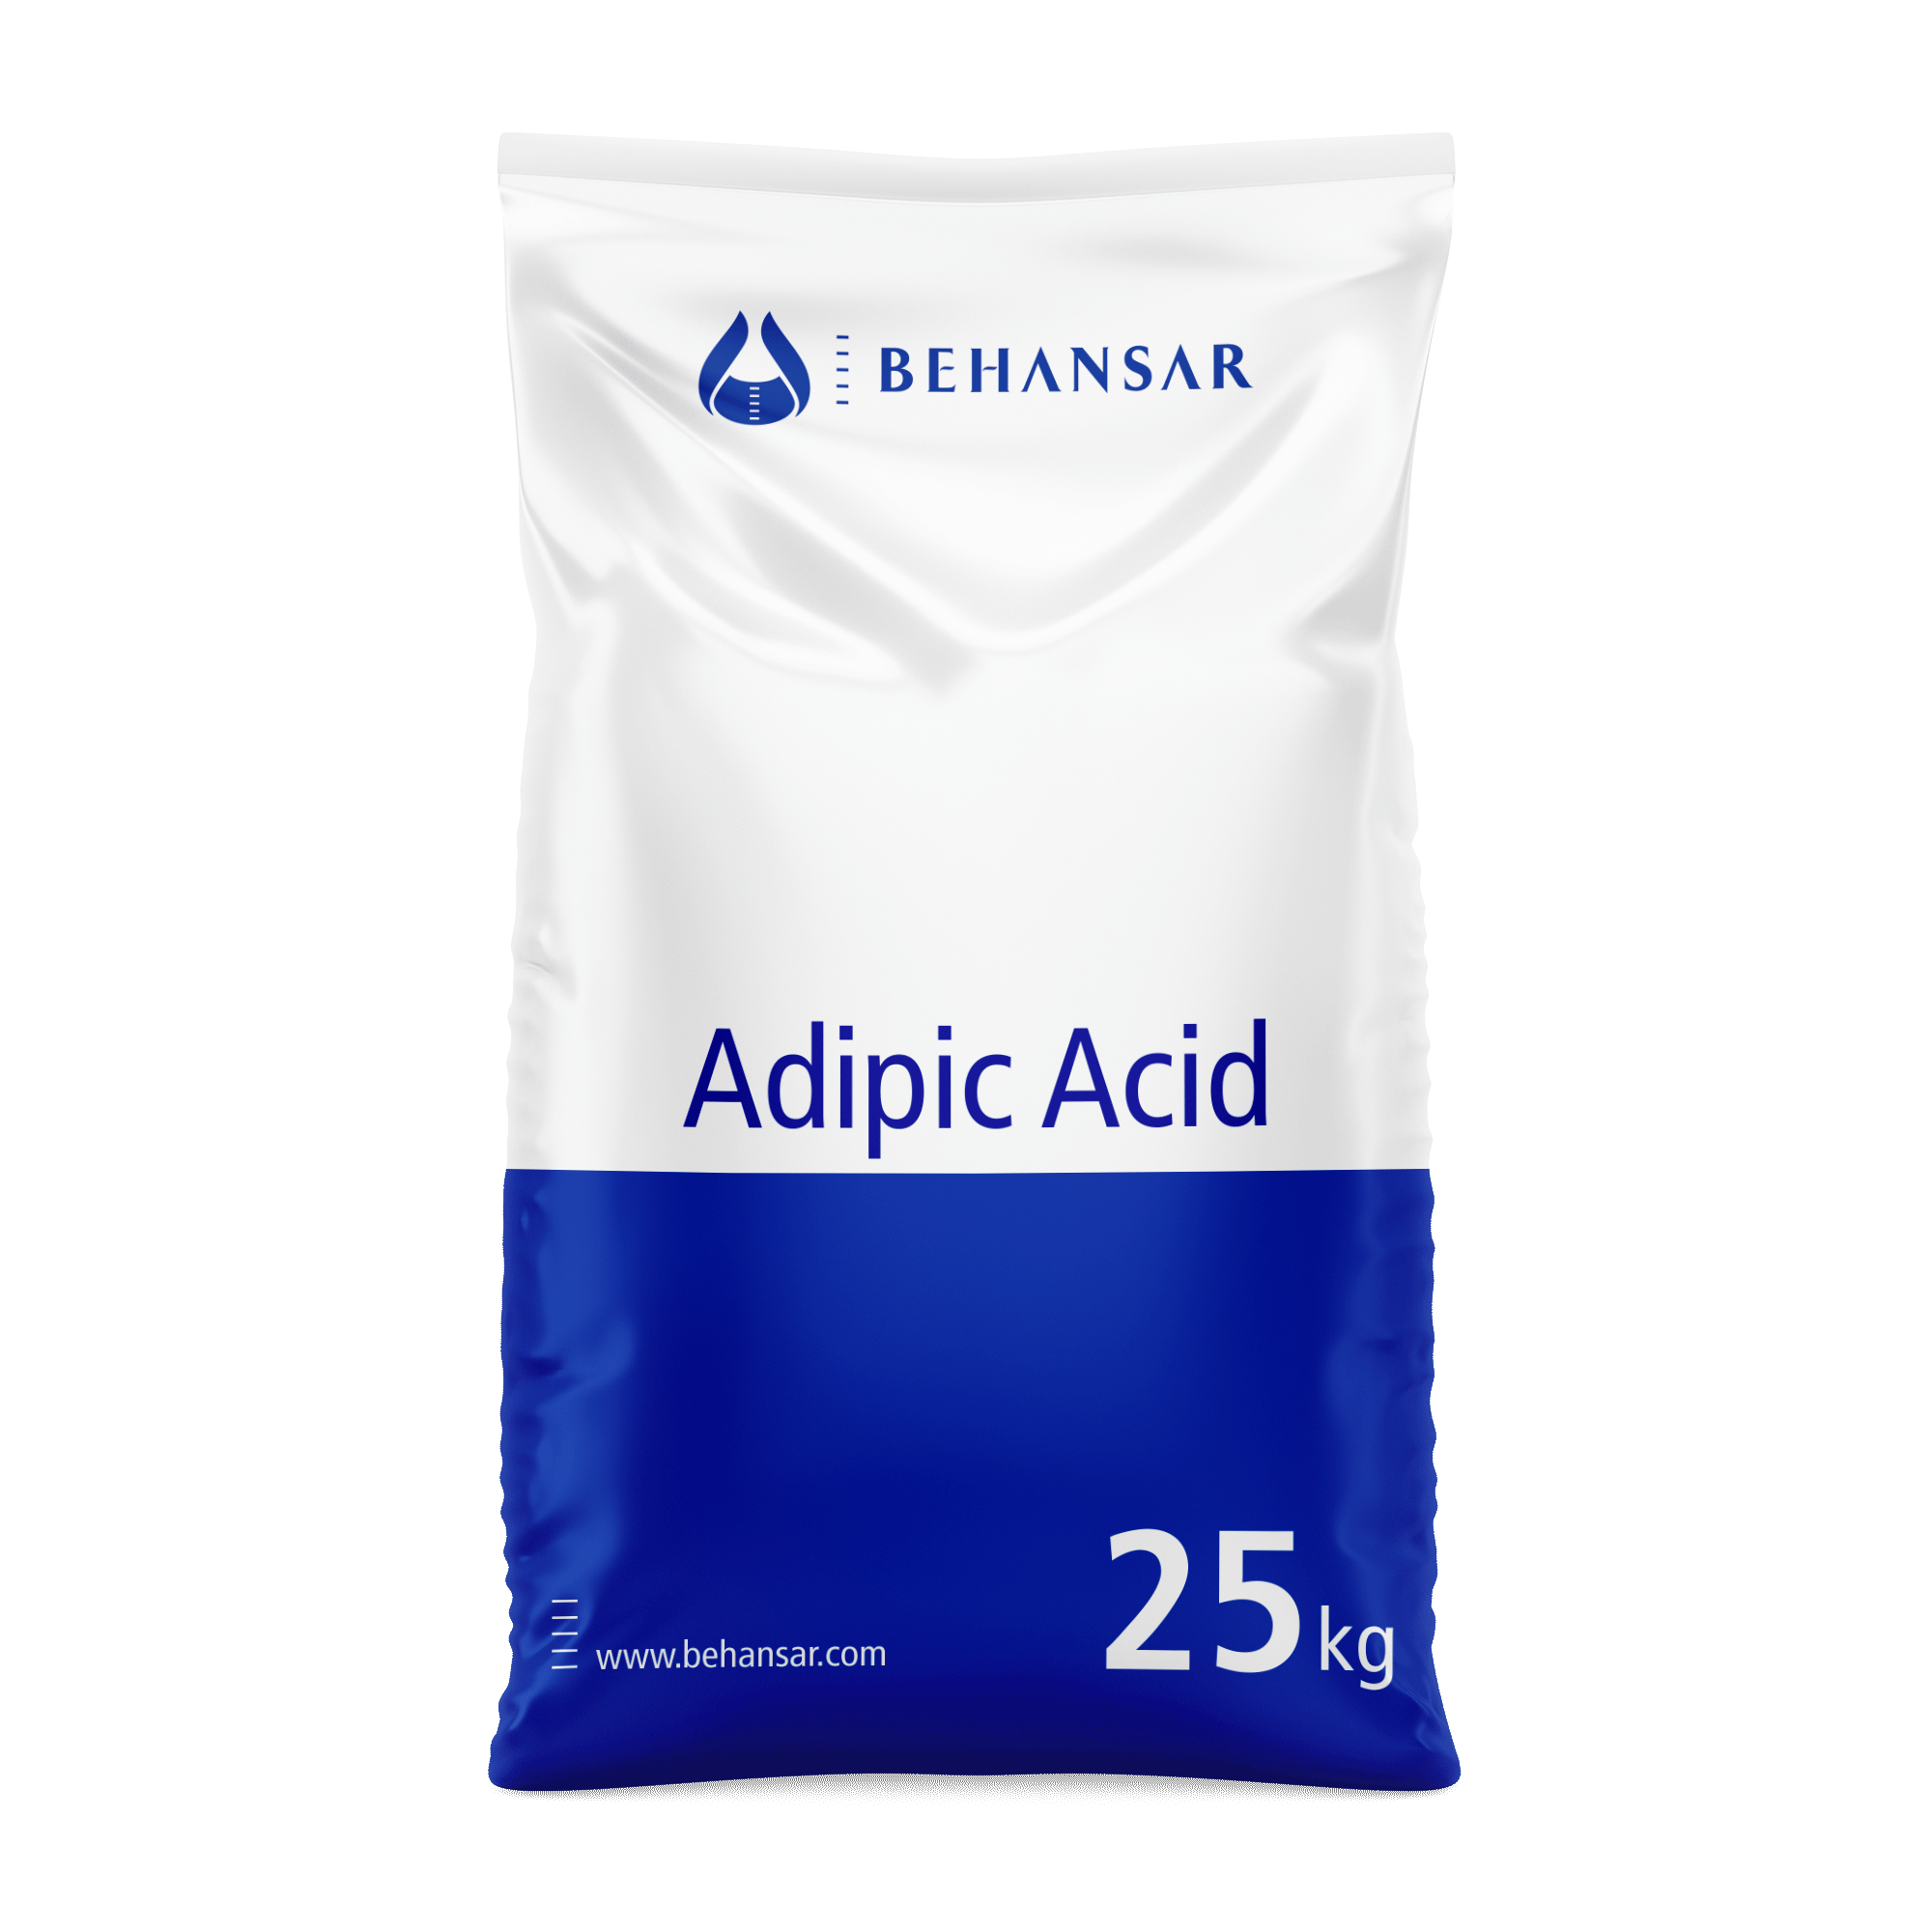 Adipic Acid is one of the products of Behansar Co